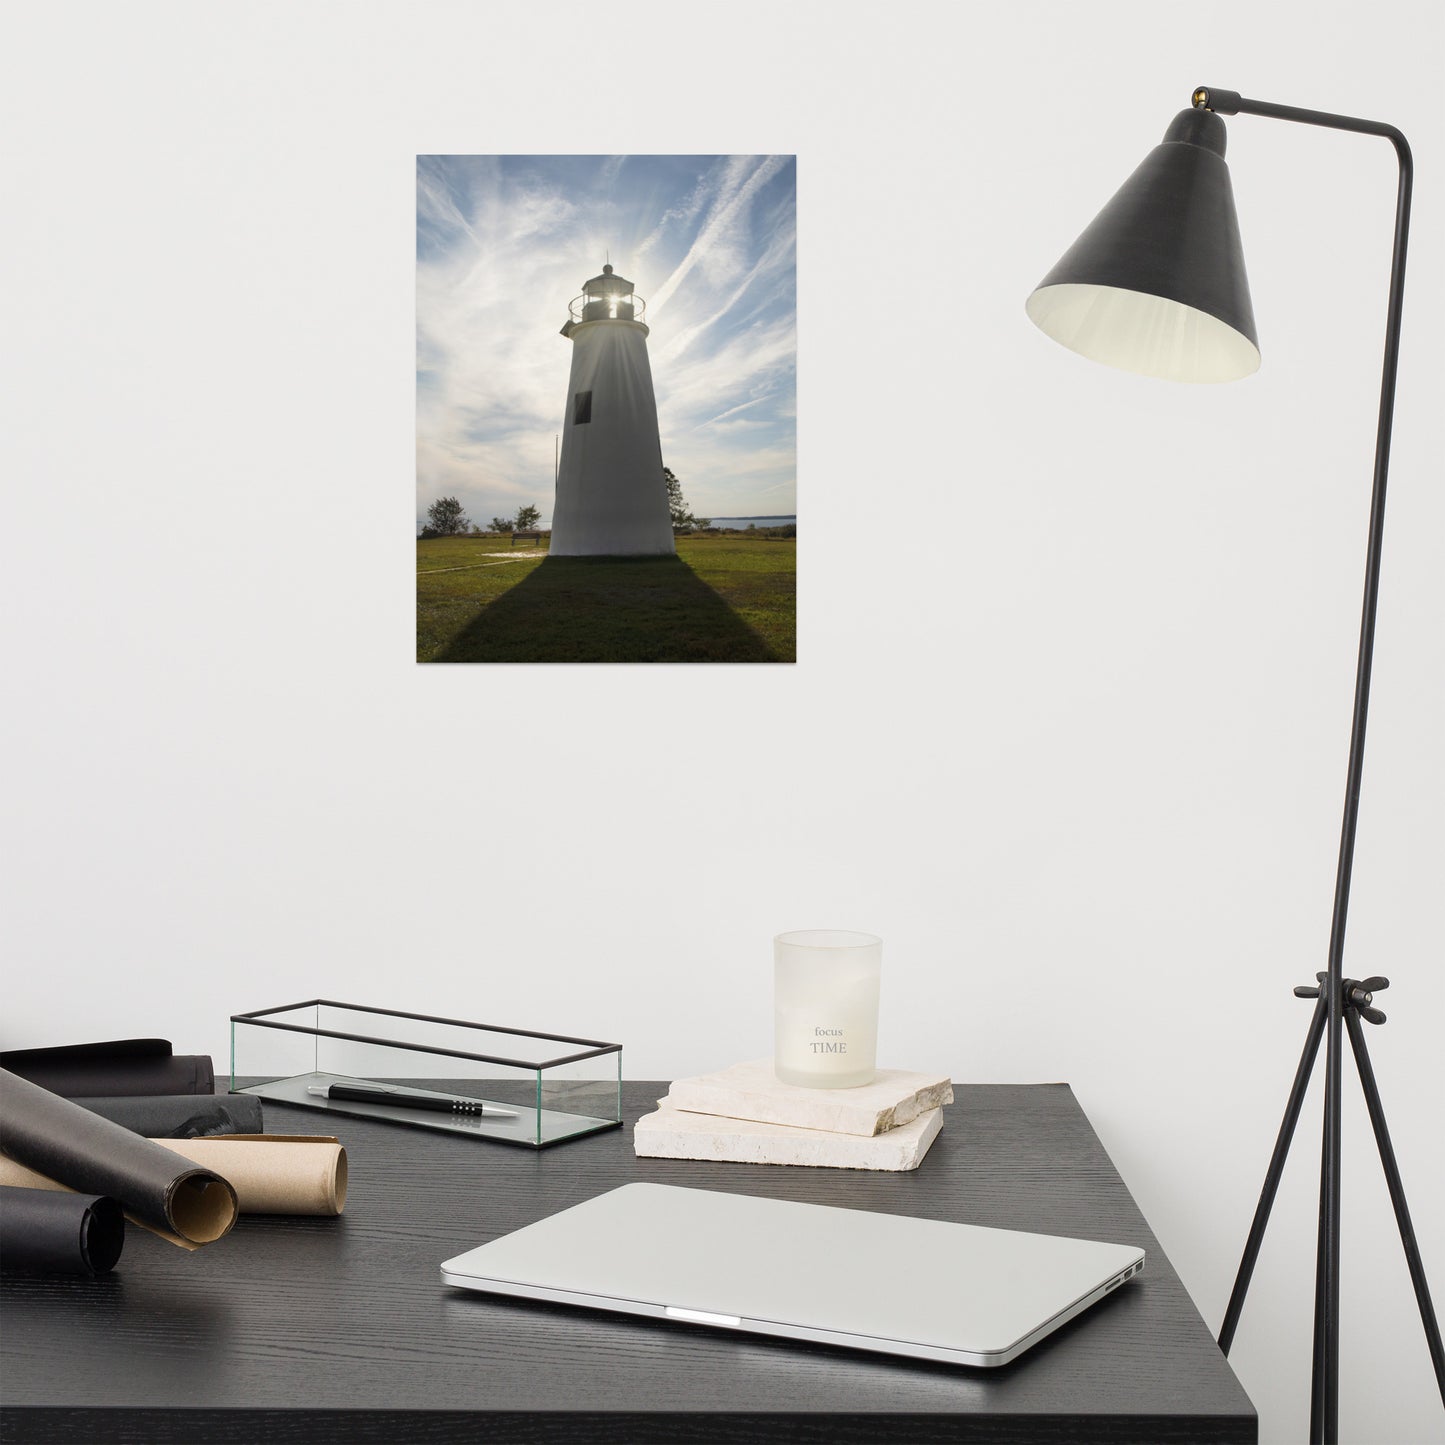 Turkey Point Lighthouse with Sun Flare Landscape Photo Loose Wall Art Print